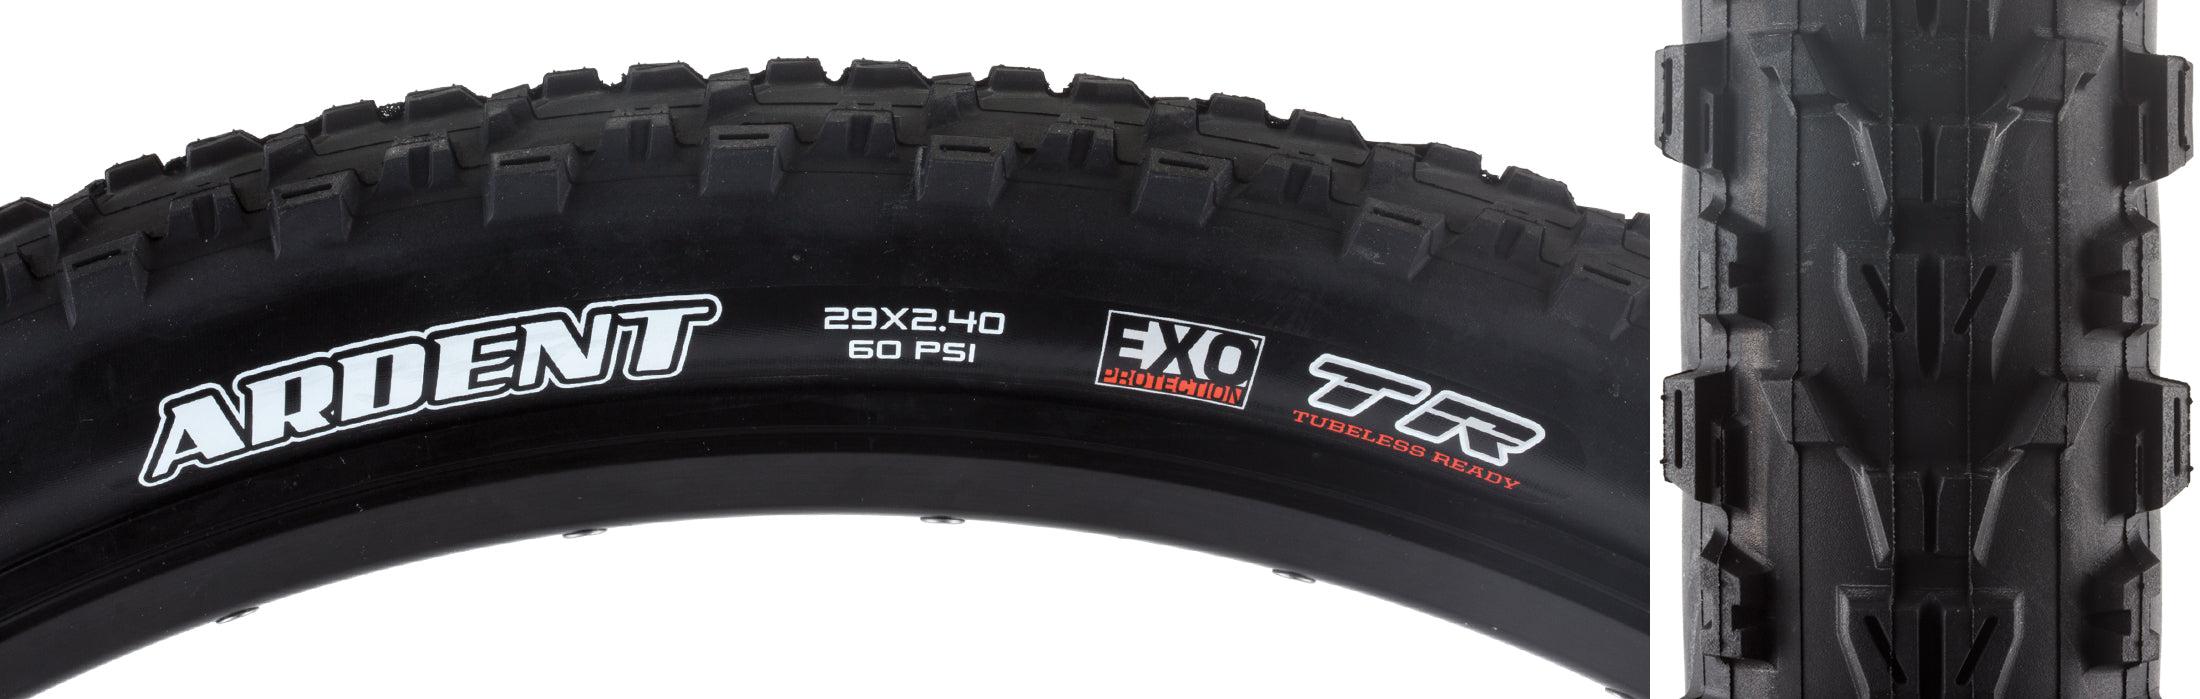 Maxxis Ardent Cross Country 29x2.4